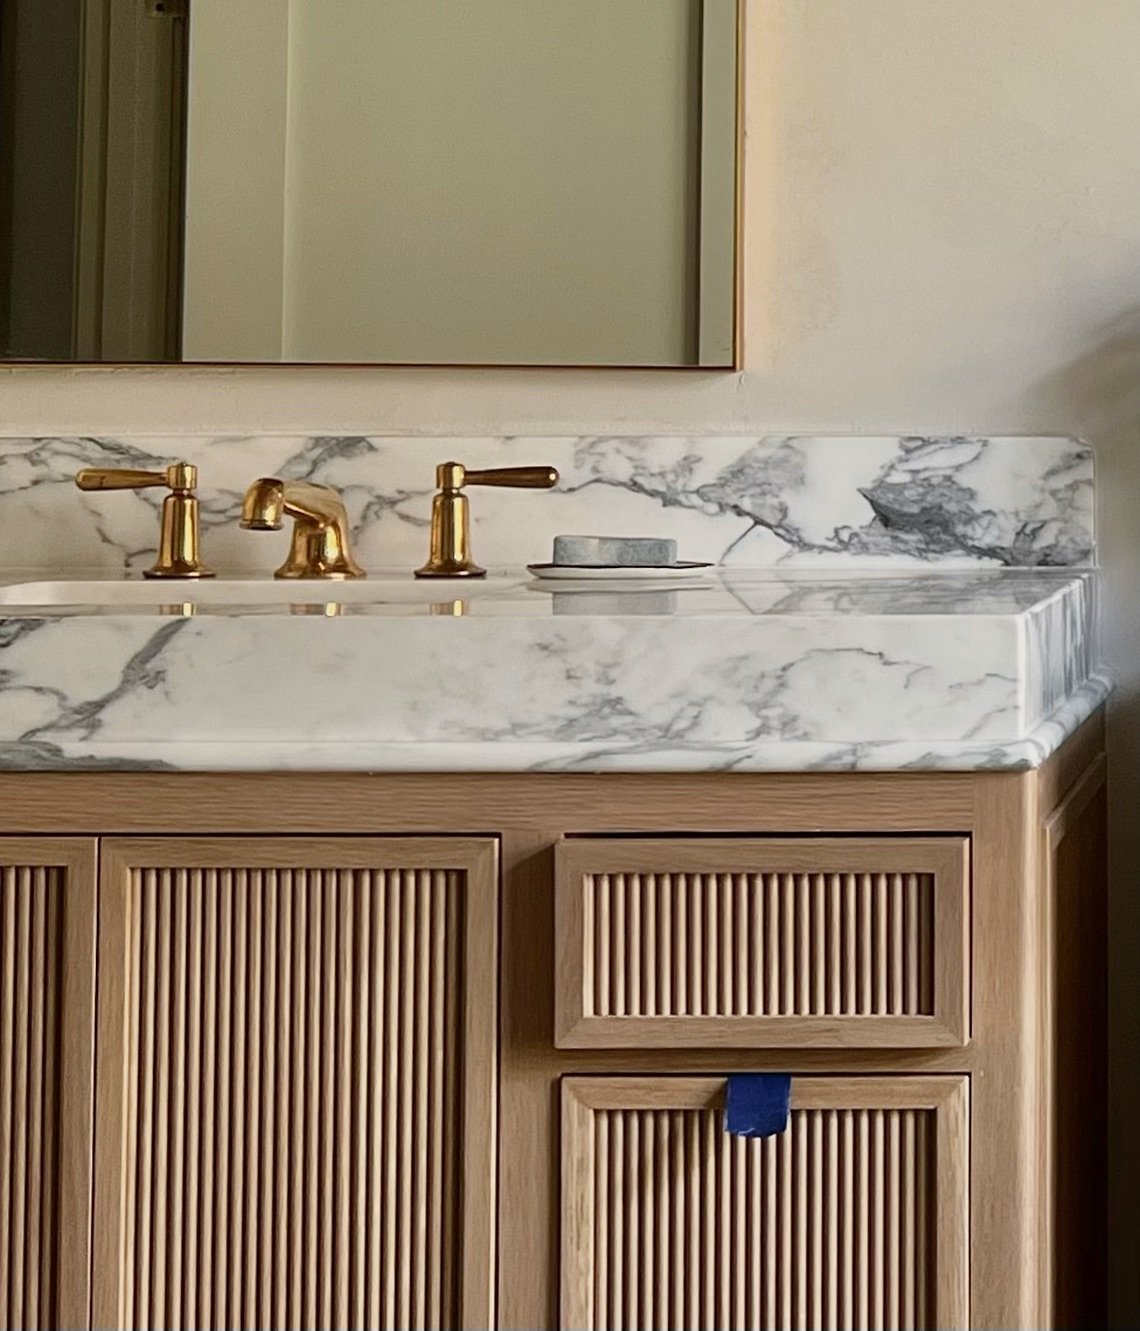 Bathroom vanity details. 

Unlaquered brass faucets and reeded cabinet fronts has us excited 🤎